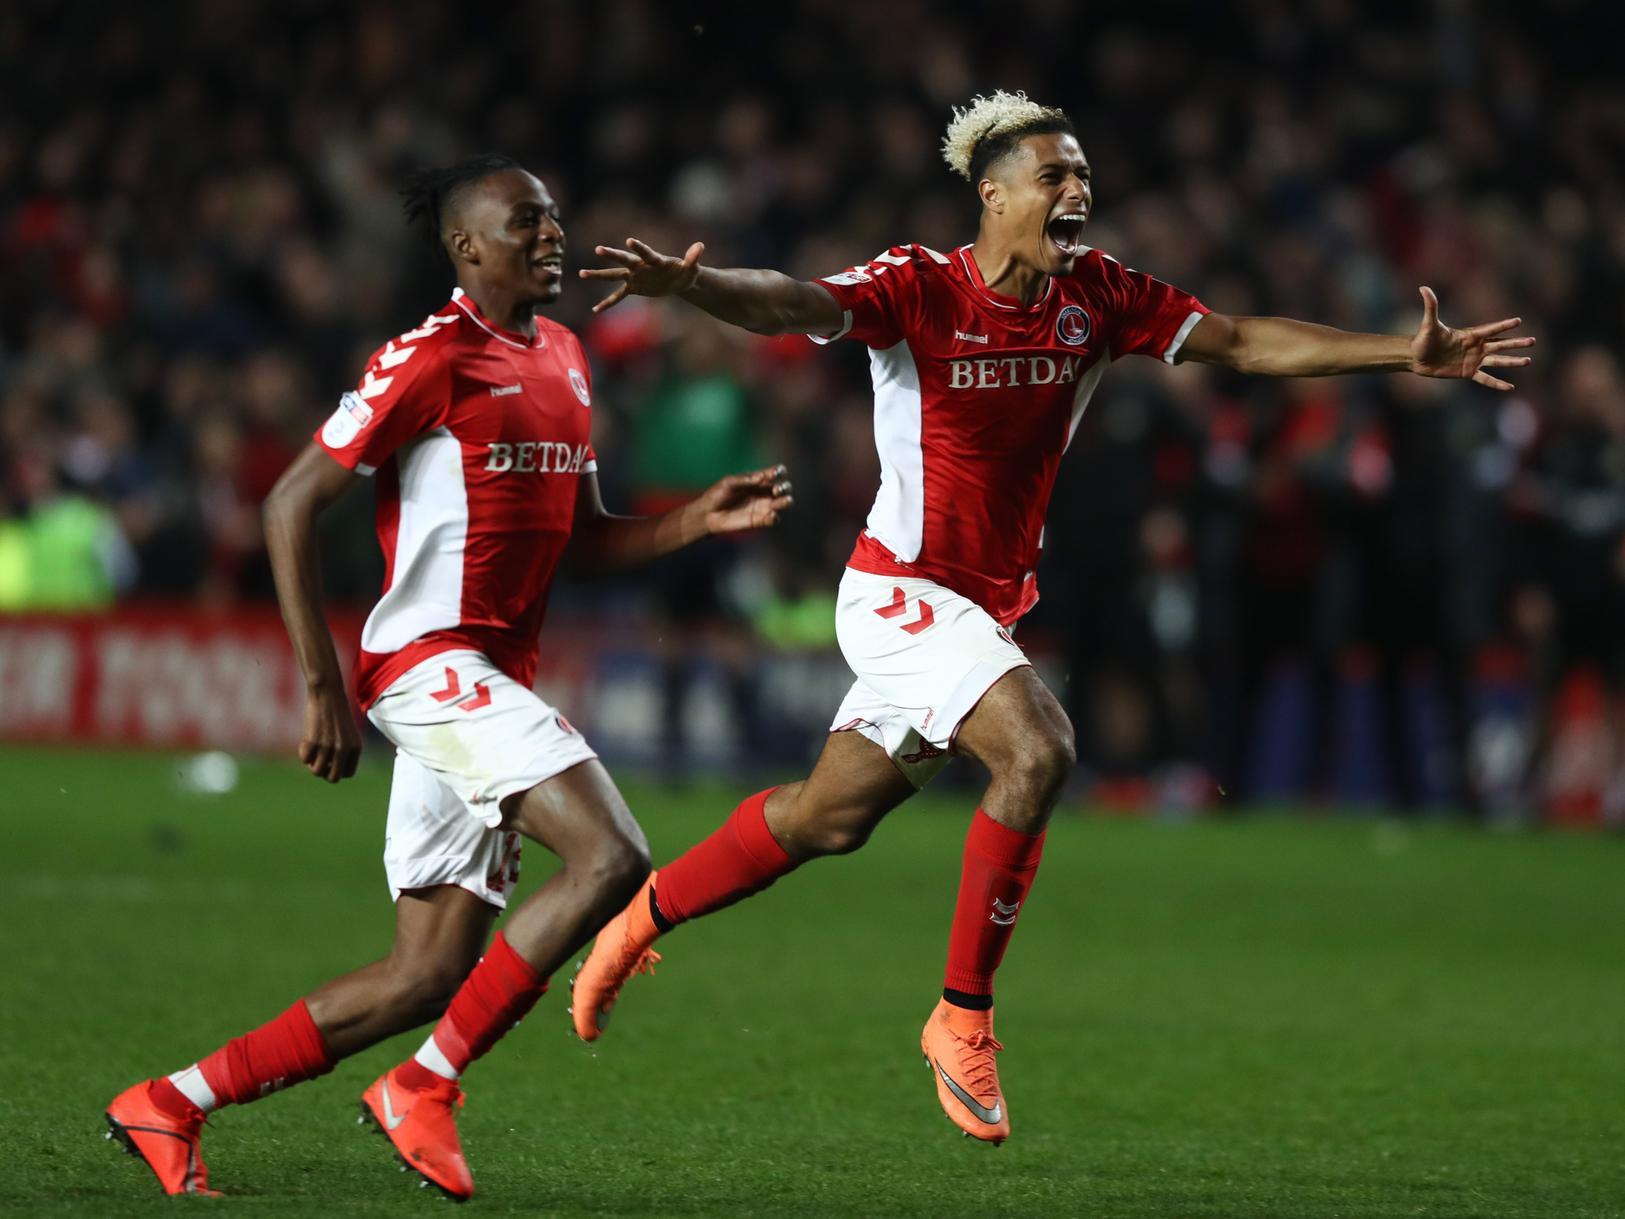 Charlton Athletic are considering the possibility of a move for Blackpool striker Armand Gnanduillet if they lose Lyle Taylor in the January transfer window. (South London Press)